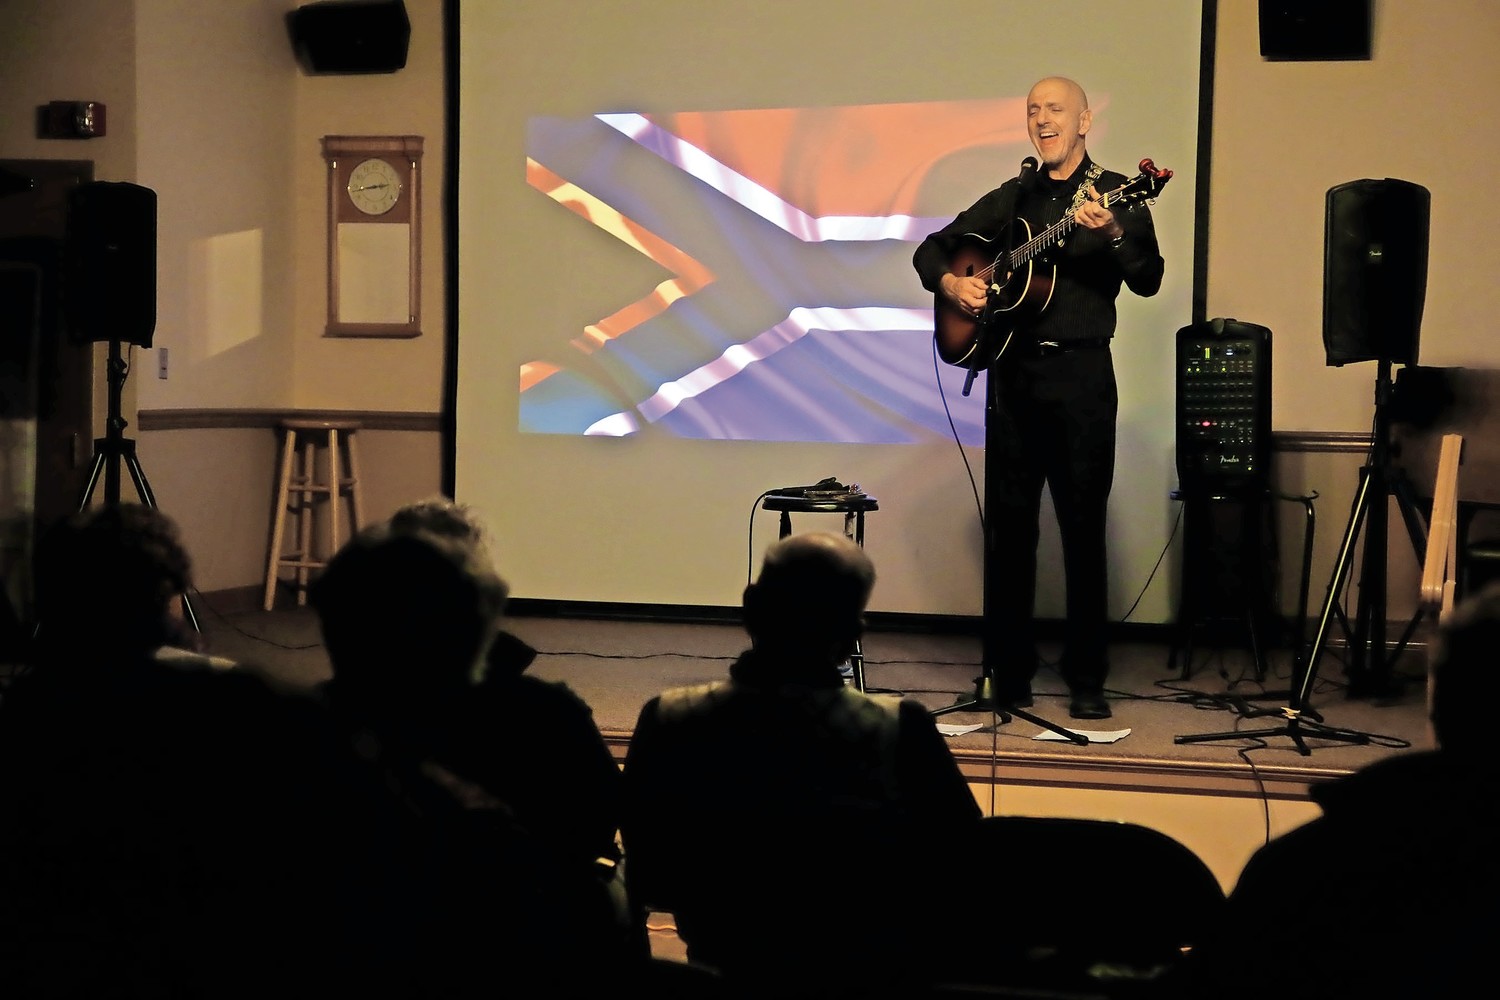 World-renowned musician Toby Tobias sang songs of happiness, love, peace and political perspectives to tell shed light into this coming to America story during an intimate performance at the Freeport Memorial Library on Feb. 4.